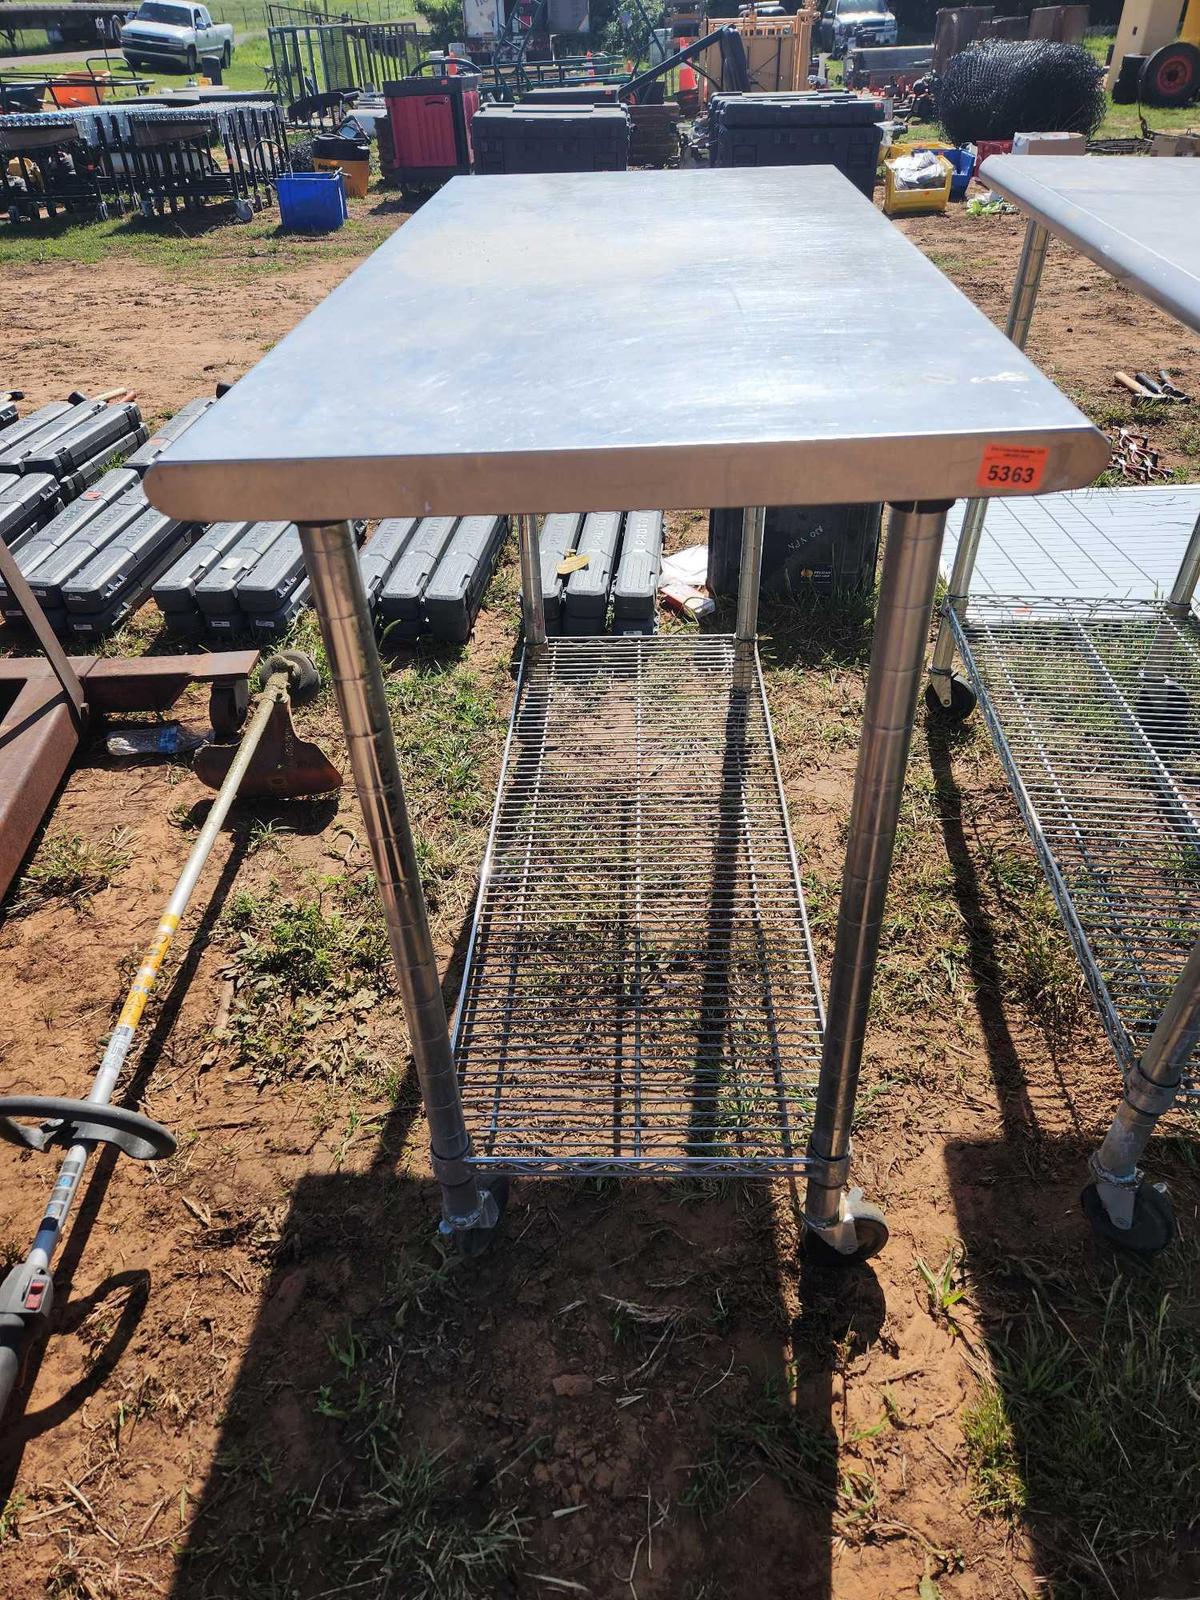 stainless steel table on casters and wire shelf